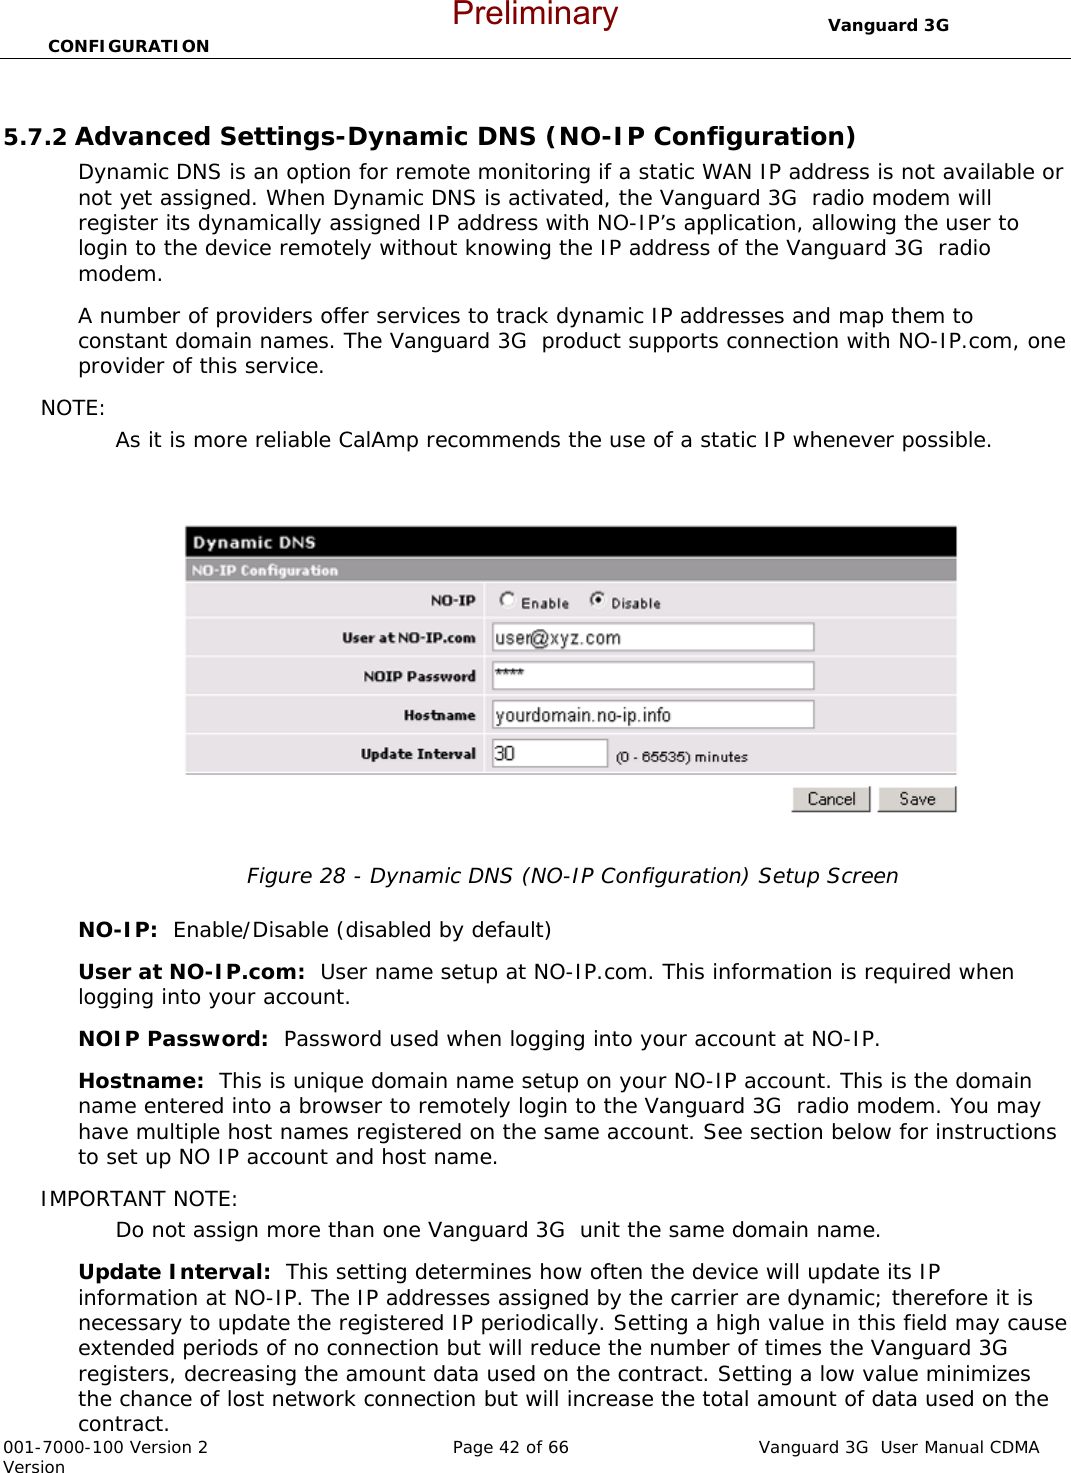                                  Vanguard 3G  CONFIGURATION  001-7000-100 Version 2       Page 42 of 66       Vanguard 3G  User Manual CDMA Version  5.7.2 Advanced Settings-Dynamic DNS (NO-IP Configuration) Dynamic DNS is an option for remote monitoring if a static WAN IP address is not available or not yet assigned. When Dynamic DNS is activated, the Vanguard 3G  radio modem will register its dynamically assigned IP address with NO-IP’s application, allowing the user to login to the device remotely without knowing the IP address of the Vanguard 3G  radio modem.   A number of providers offer services to track dynamic IP addresses and map them to constant domain names. The Vanguard 3G  product supports connection with NO-IP.com, one provider of this service.   NOTE:  As it is more reliable CalAmp recommends the use of a static IP whenever possible.    Figure 28 - Dynamic DNS (NO-IP Configuration) Setup Screen  NO-IP:  Enable/Disable (disabled by default)   User at NO-IP.com:  User name setup at NO-IP.com. This information is required when logging into your account. NOIP Password:  Password used when logging into your account at NO-IP.   Hostname:  This is unique domain name setup on your NO-IP account. This is the domain name entered into a browser to remotely login to the Vanguard 3G  radio modem. You may have multiple host names registered on the same account. See section below for instructions to set up NO IP account and host name.   IMPORTANT NOTE:  Do not assign more than one Vanguard 3G  unit the same domain name. Update Interval:  This setting determines how often the device will update its IP information at NO-IP. The IP addresses assigned by the carrier are dynamic; therefore it is necessary to update the registered IP periodically. Setting a high value in this field may cause extended periods of no connection but will reduce the number of times the Vanguard 3G  registers, decreasing the amount data used on the contract. Setting a low value minimizes the chance of lost network connection but will increase the total amount of data used on the contract.   Preliminary